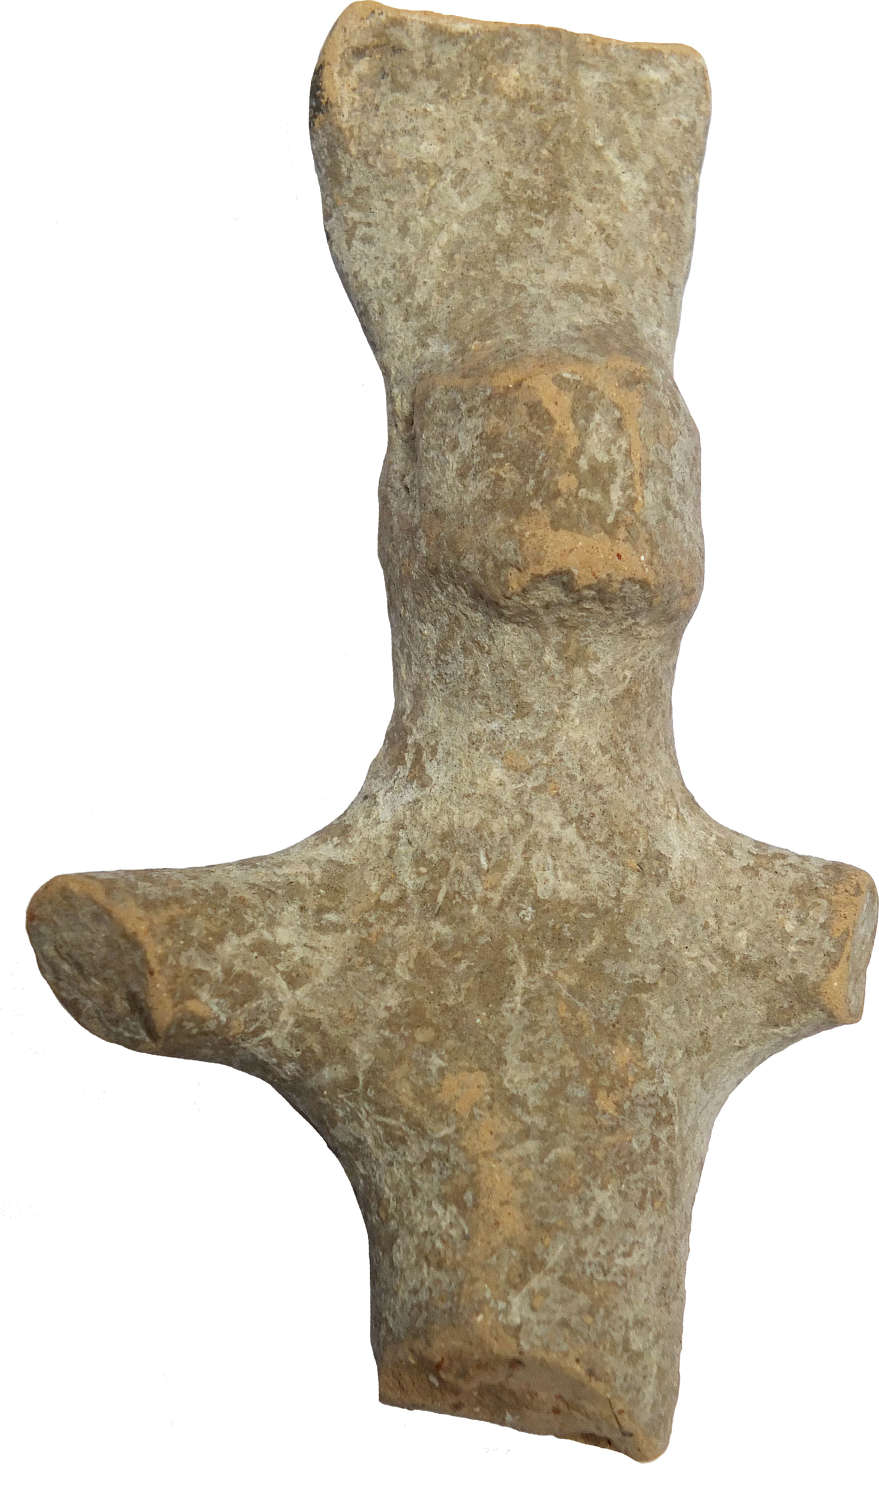 The upper part of a Cypriote votive pottery figure, c. 950 B.C.